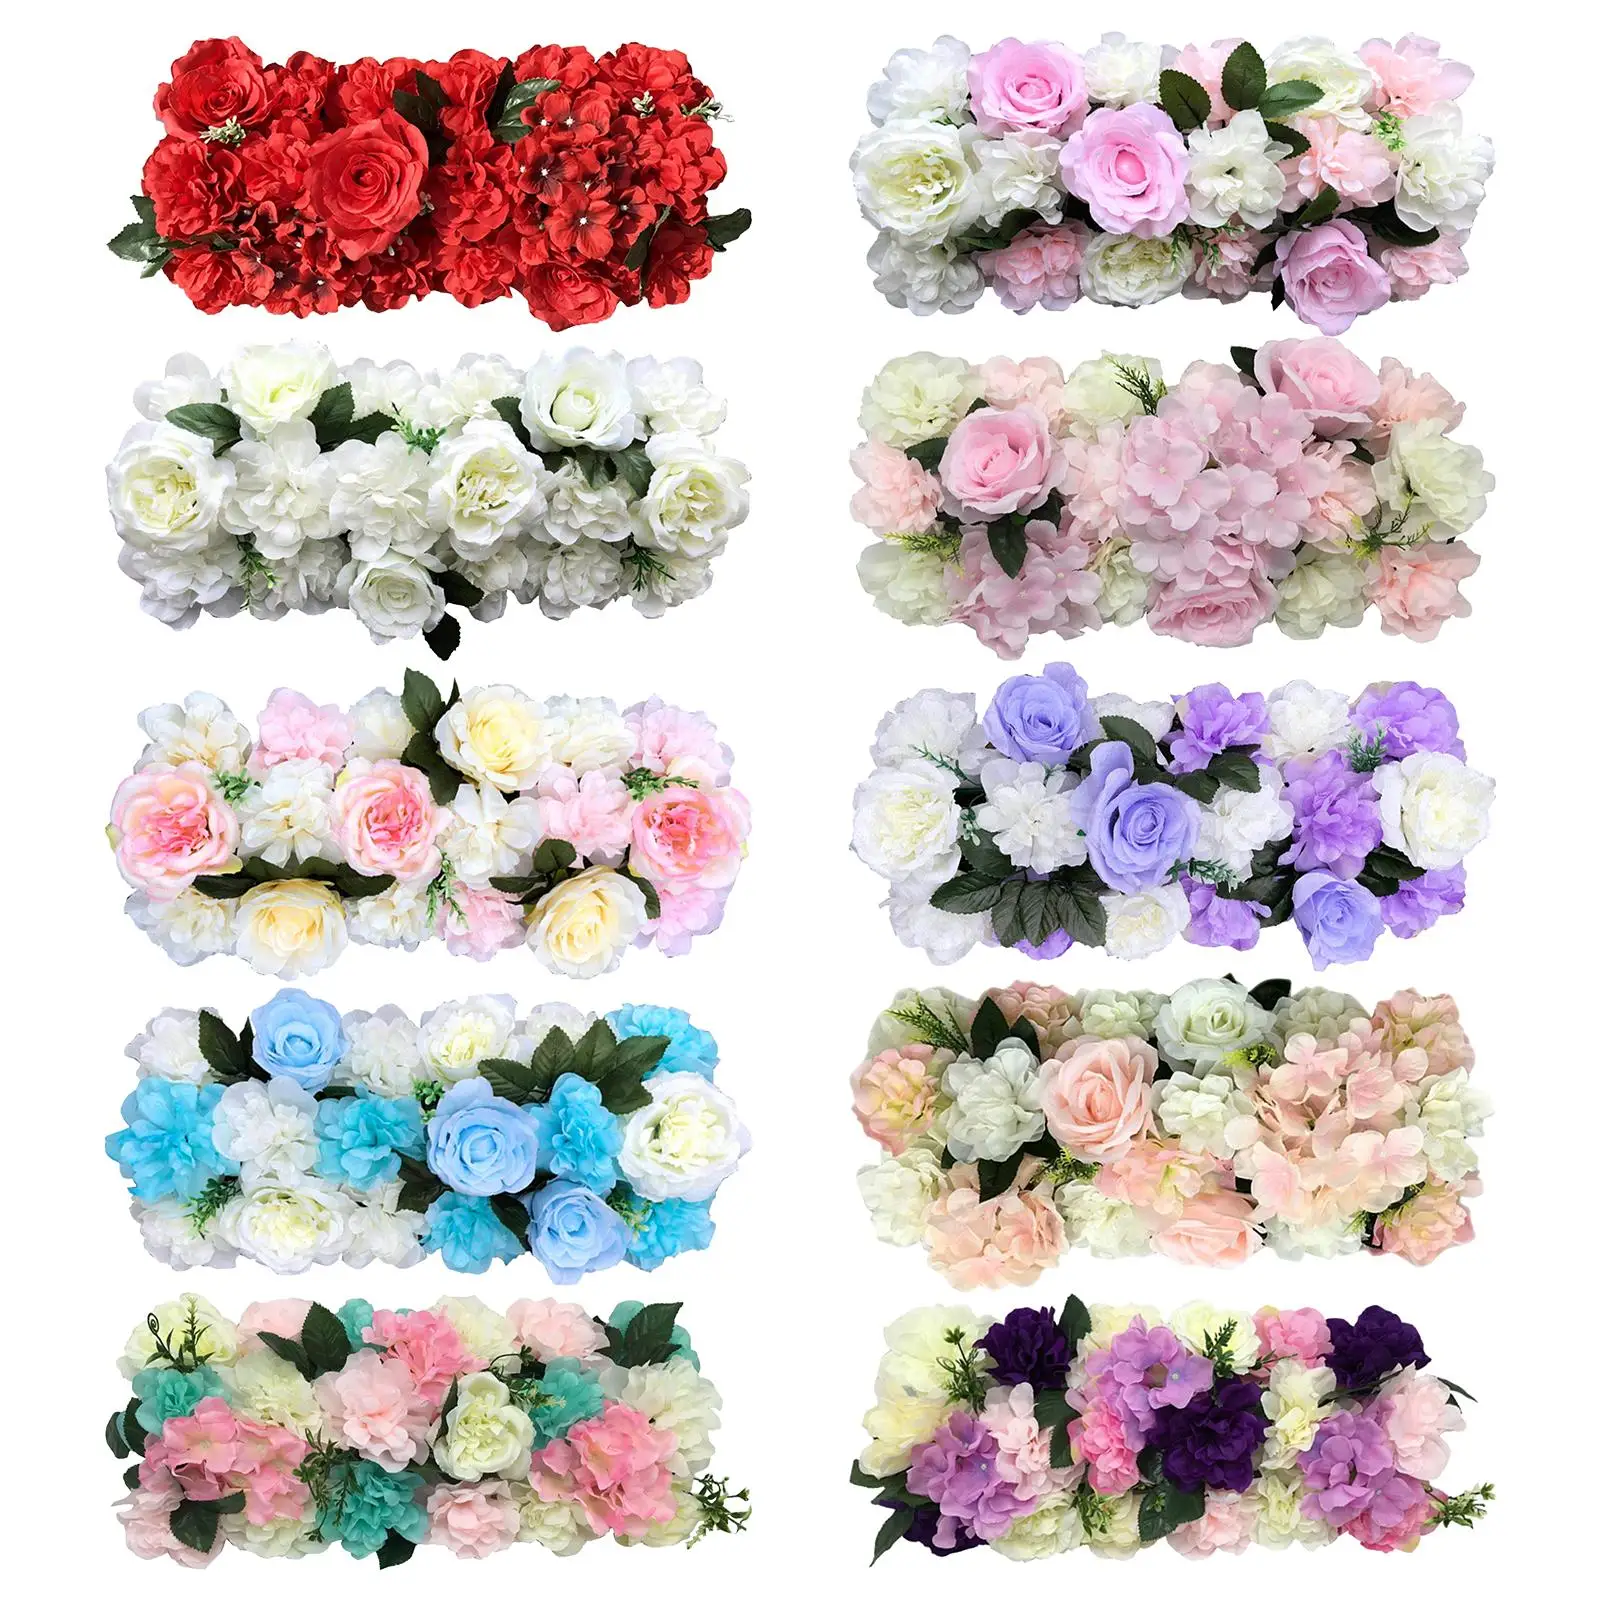 Artificial Flower Wall Backdrop DIY Arched Door Flower Row Wedding Road Cited Flowers Flowers Wall Panel for Party T Station